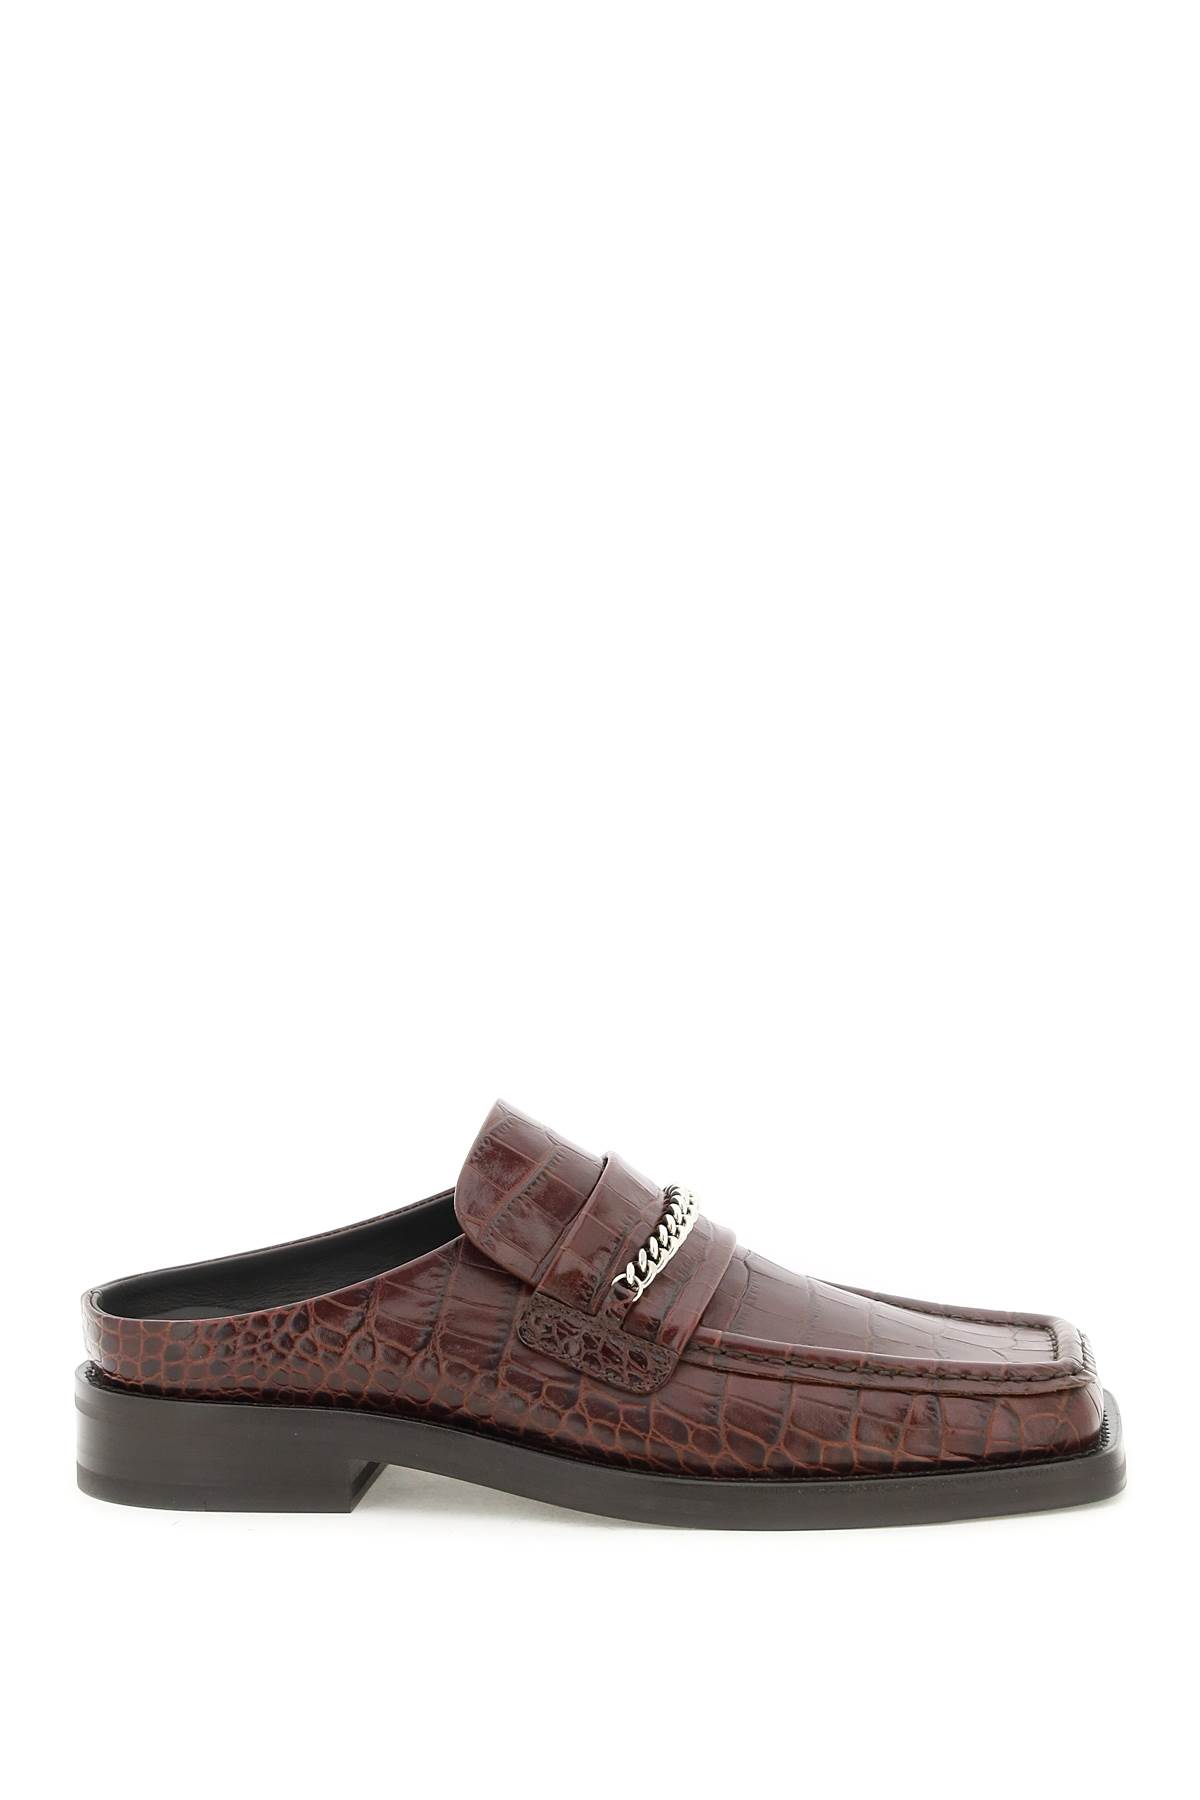 Martine Rose Croco-embossed Leather Loafers Mules